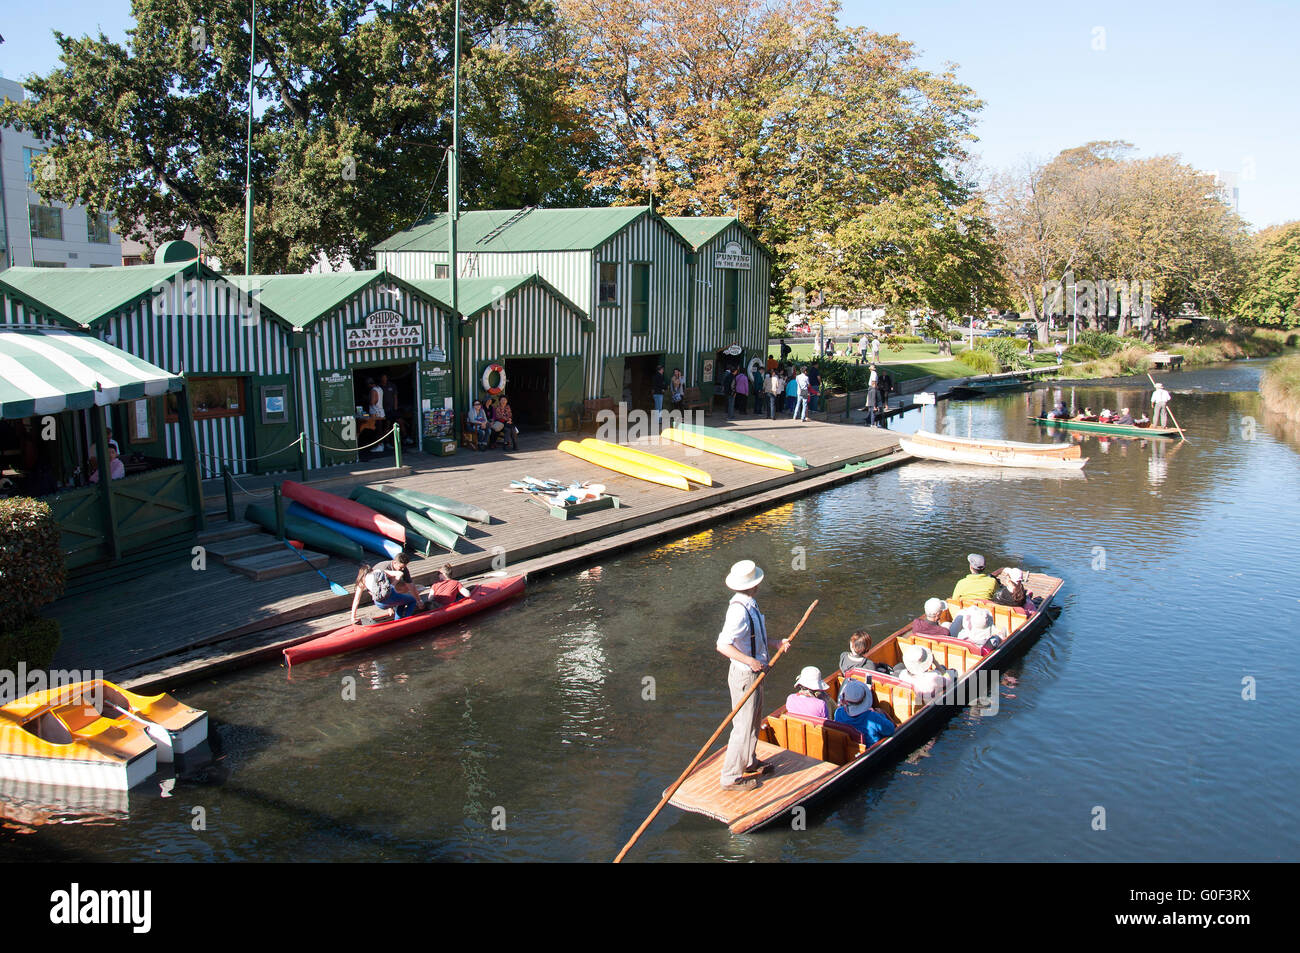 Punting on River Avon at Antigua Boat Sheds, Cambridge Terrace, Christchurch, Canterbury, New Zealand Stock Photo